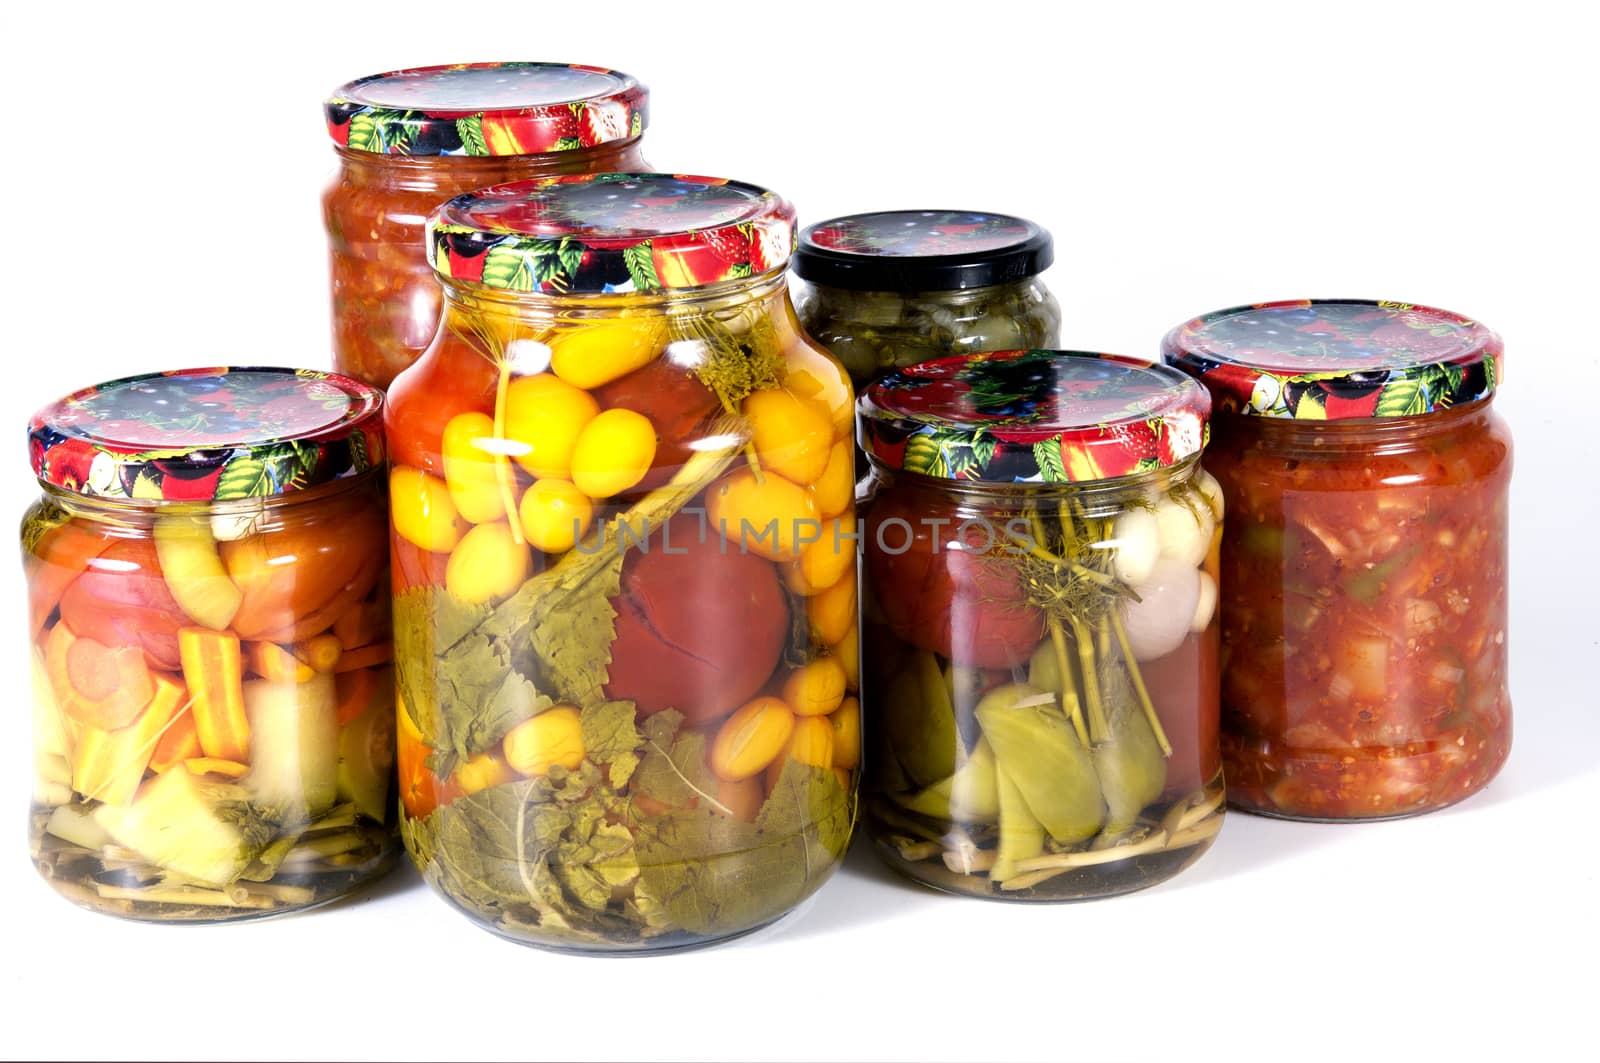 Homemade canned vegetables - very tasty products for the whole family